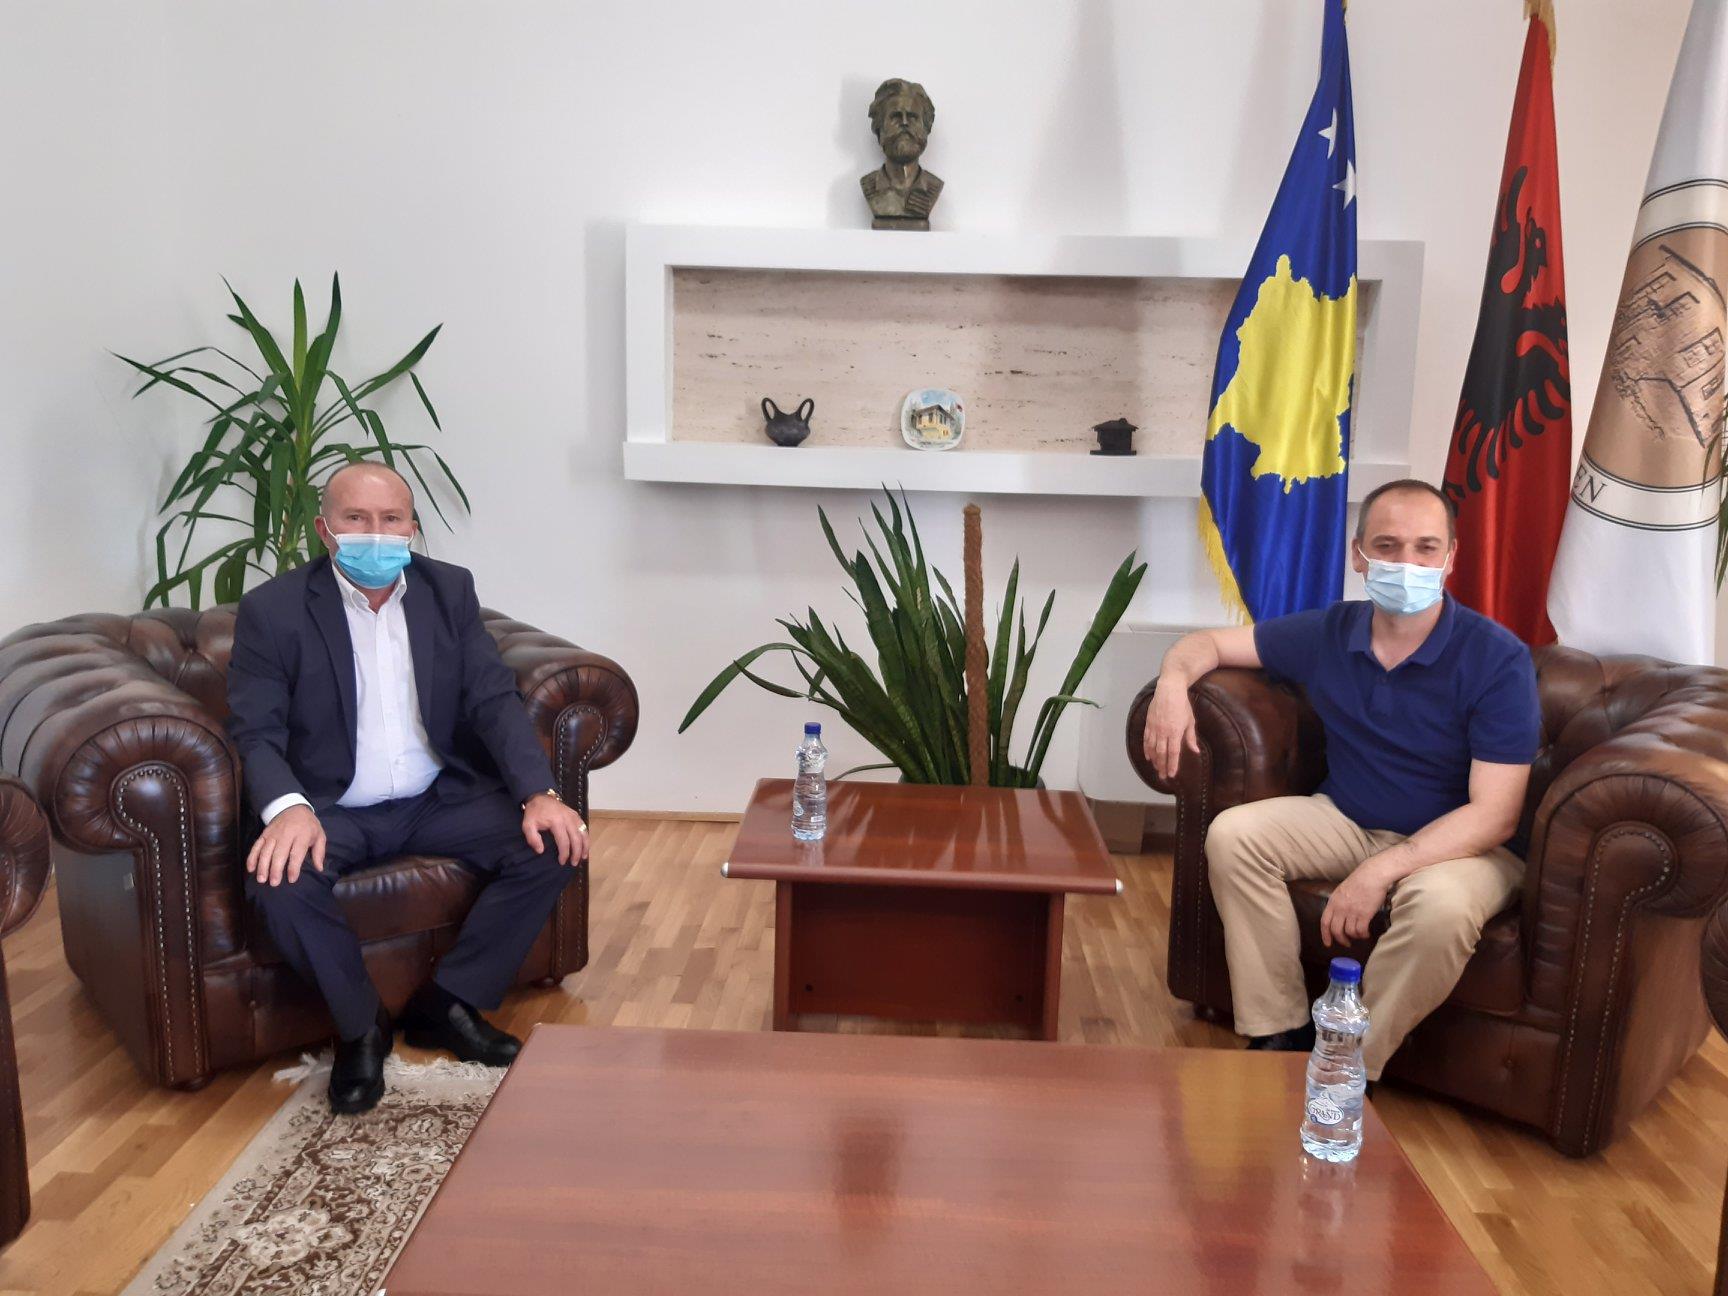 General Director of the Emergency Management Agency MIA Mr. Fadil KODRA was received by the Mayor of Prizren, Mr. Mytaher HASKUKA